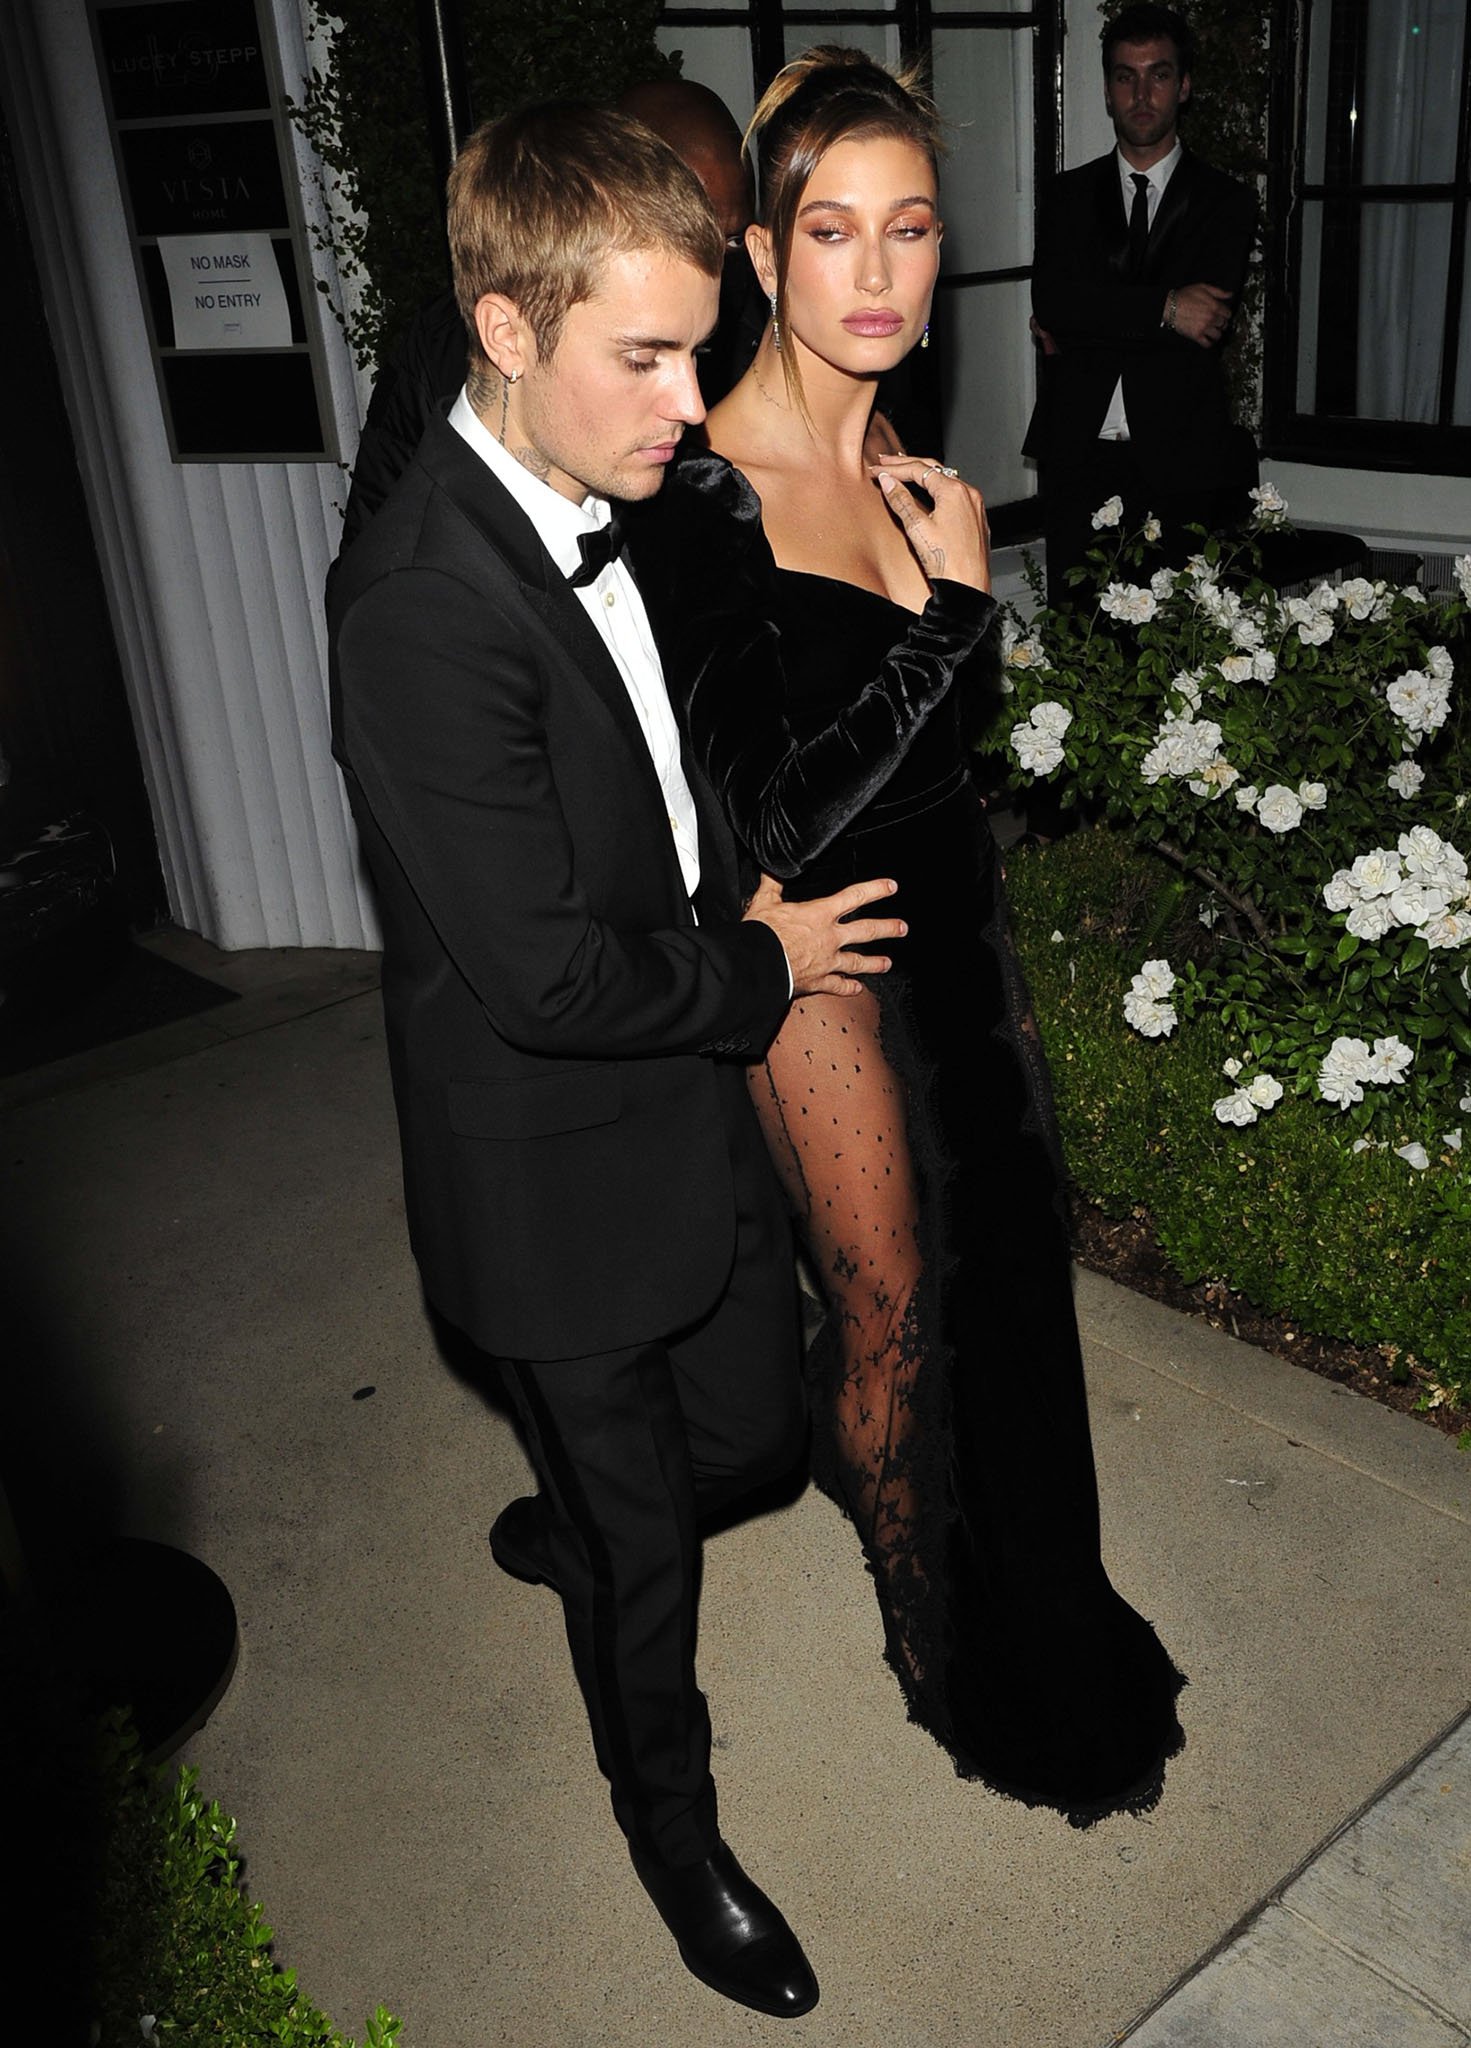 Justin Bieber looks handsome in Saint Laurent by Anthony Vaccarello tuxedo suit